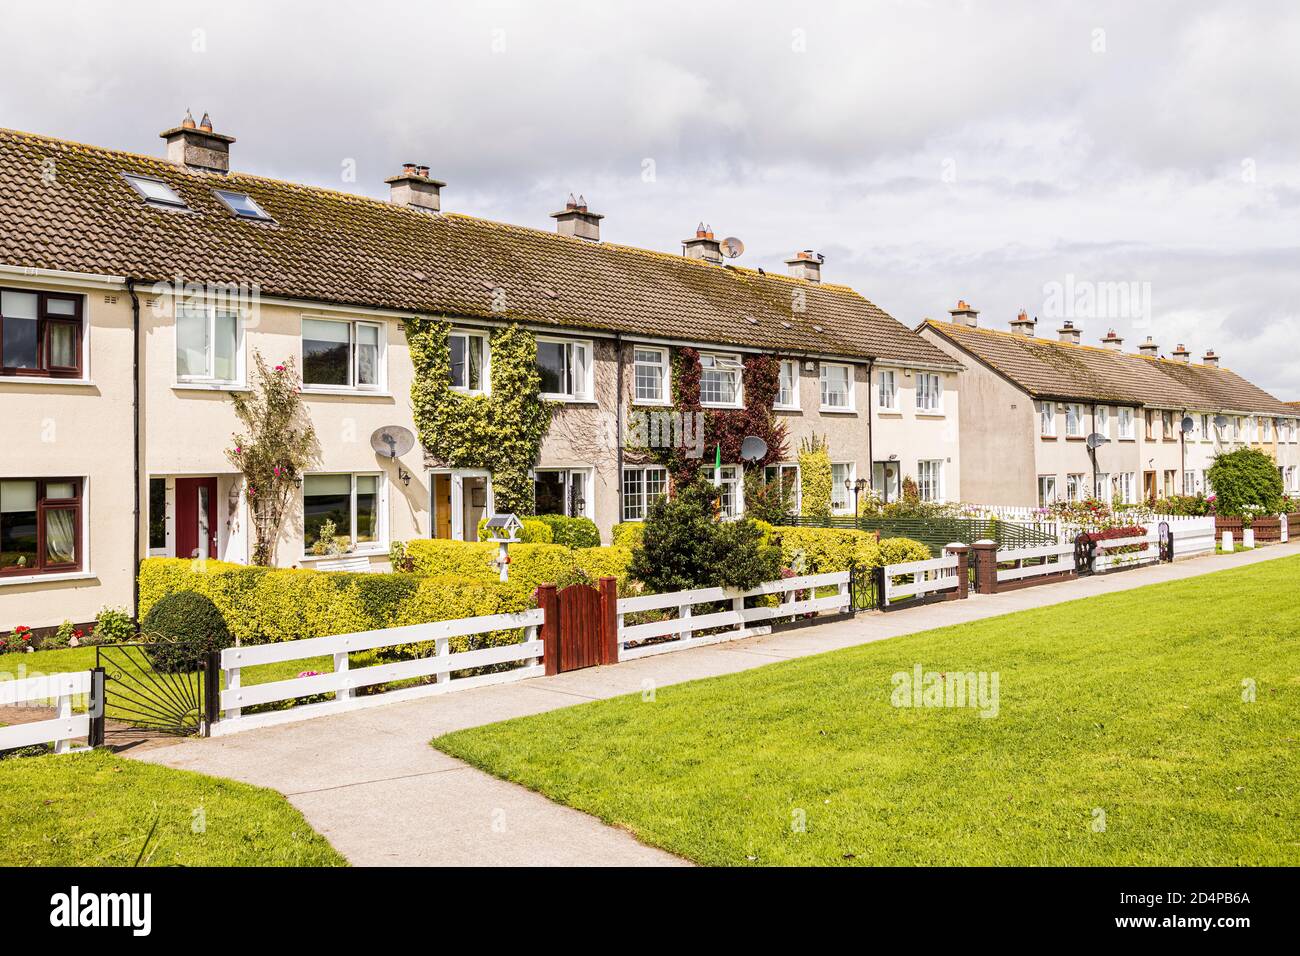 Neat and tidy terrace of houses in the village of Kill, County Kildare, Ireland Stock Photo